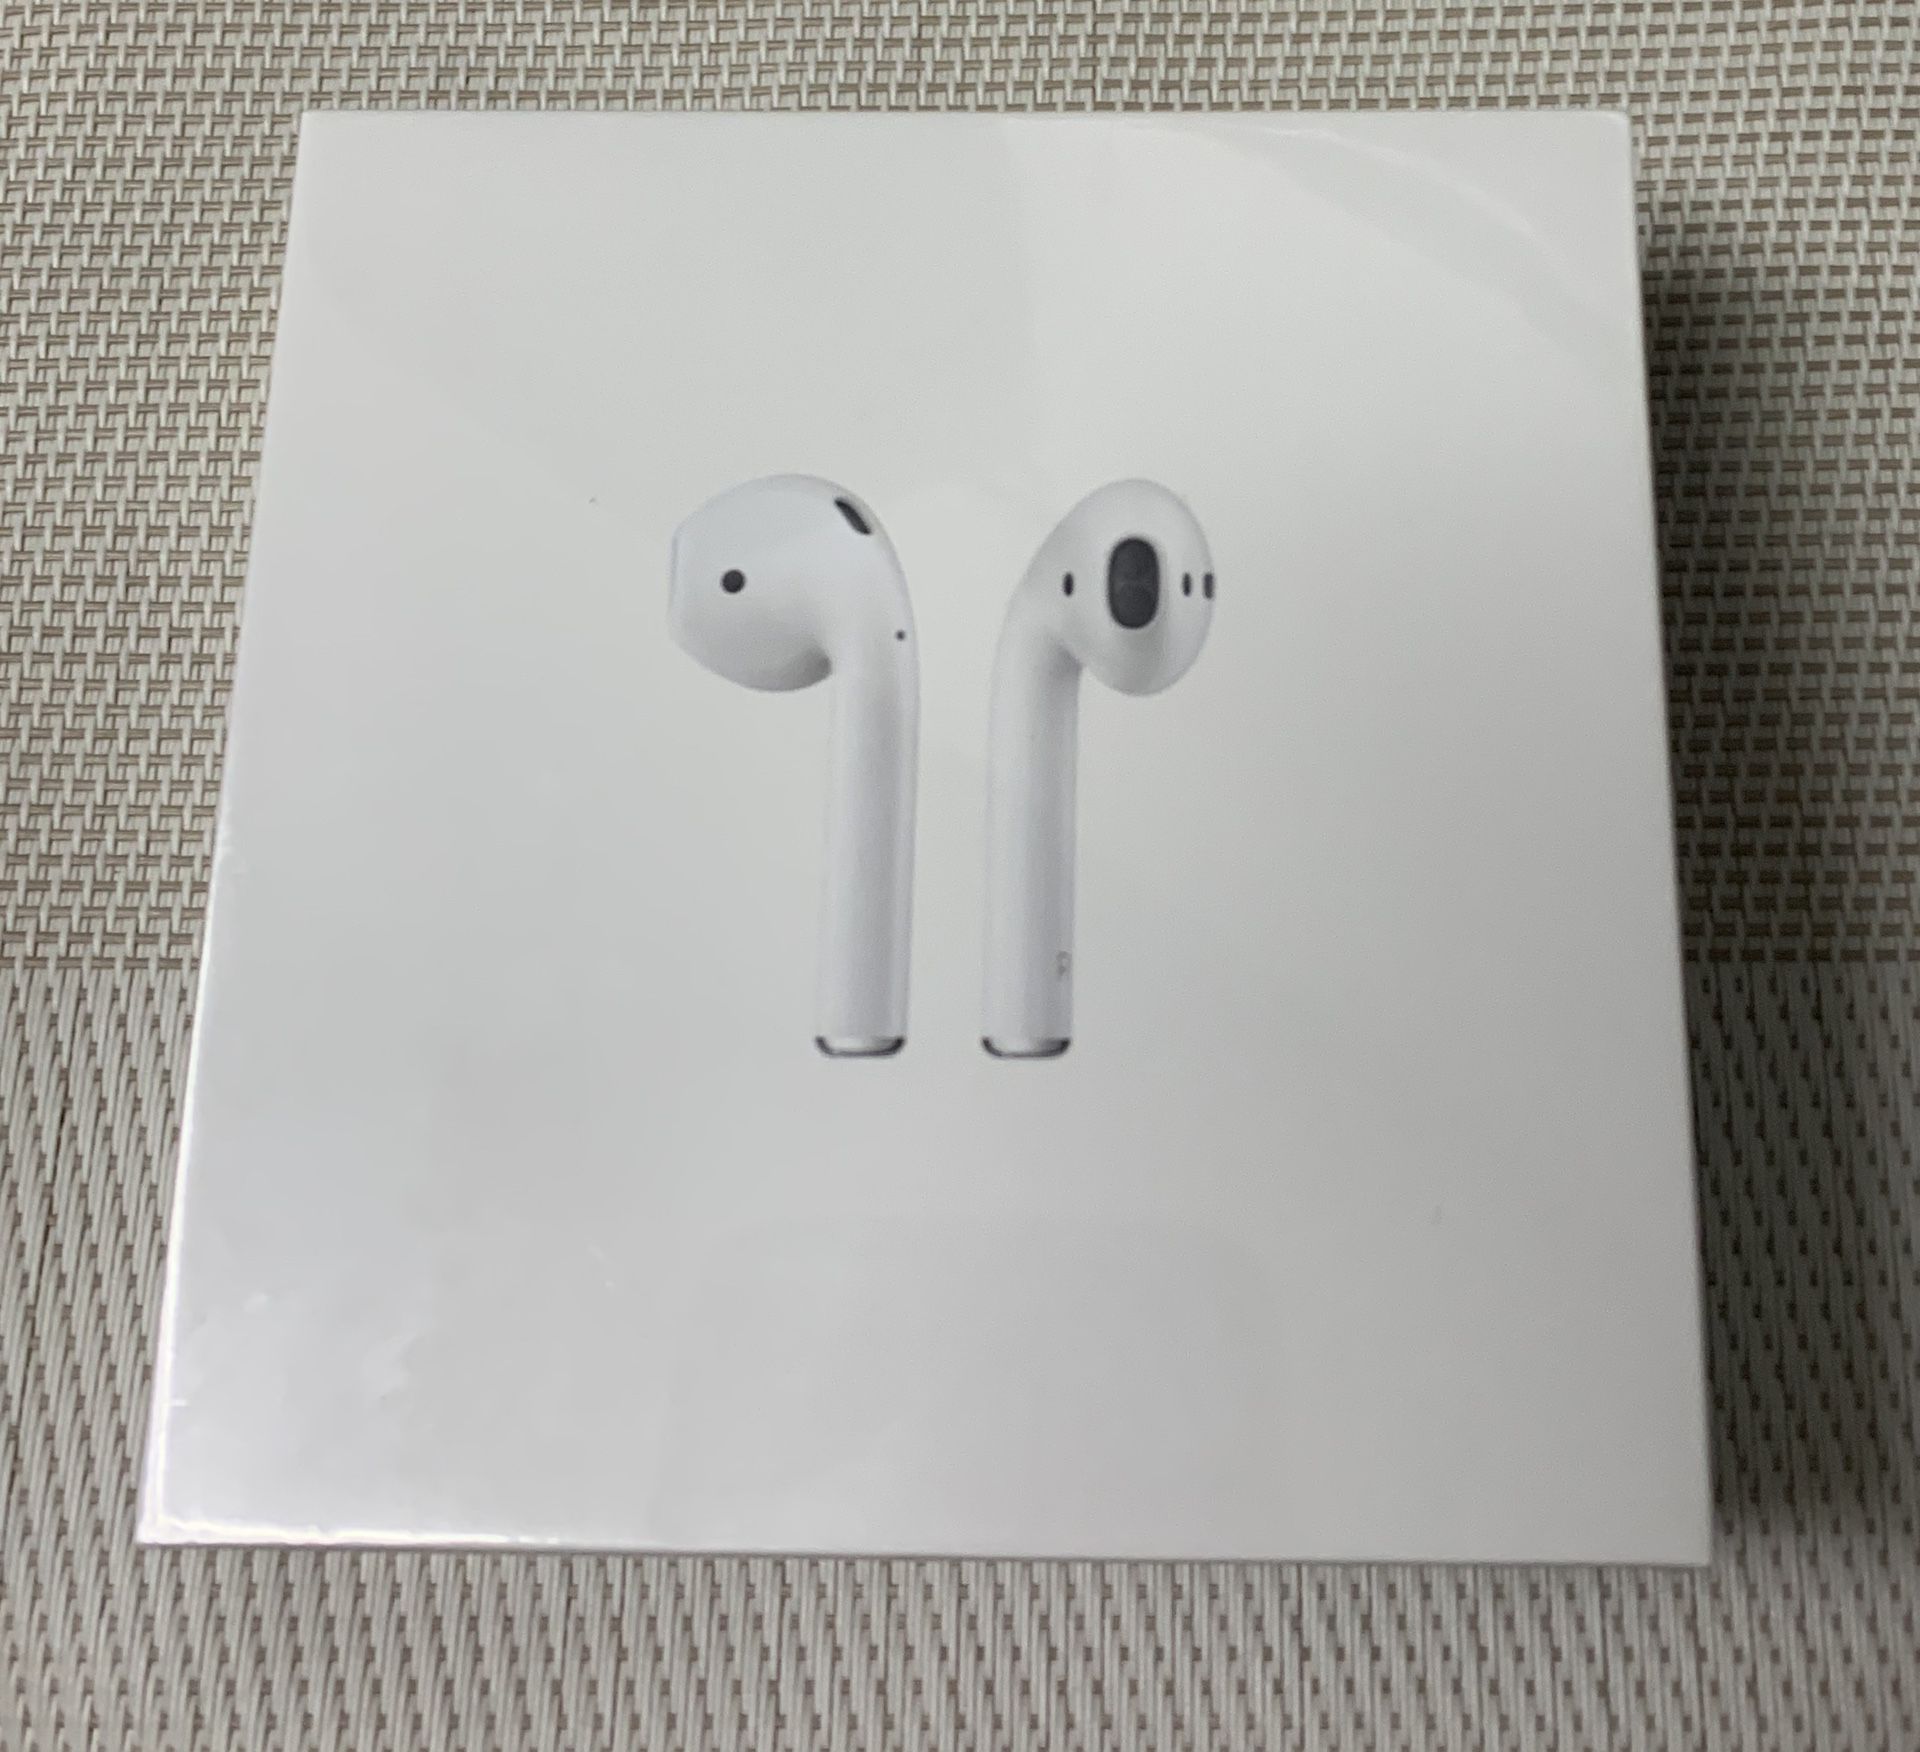 Air pods With charging case